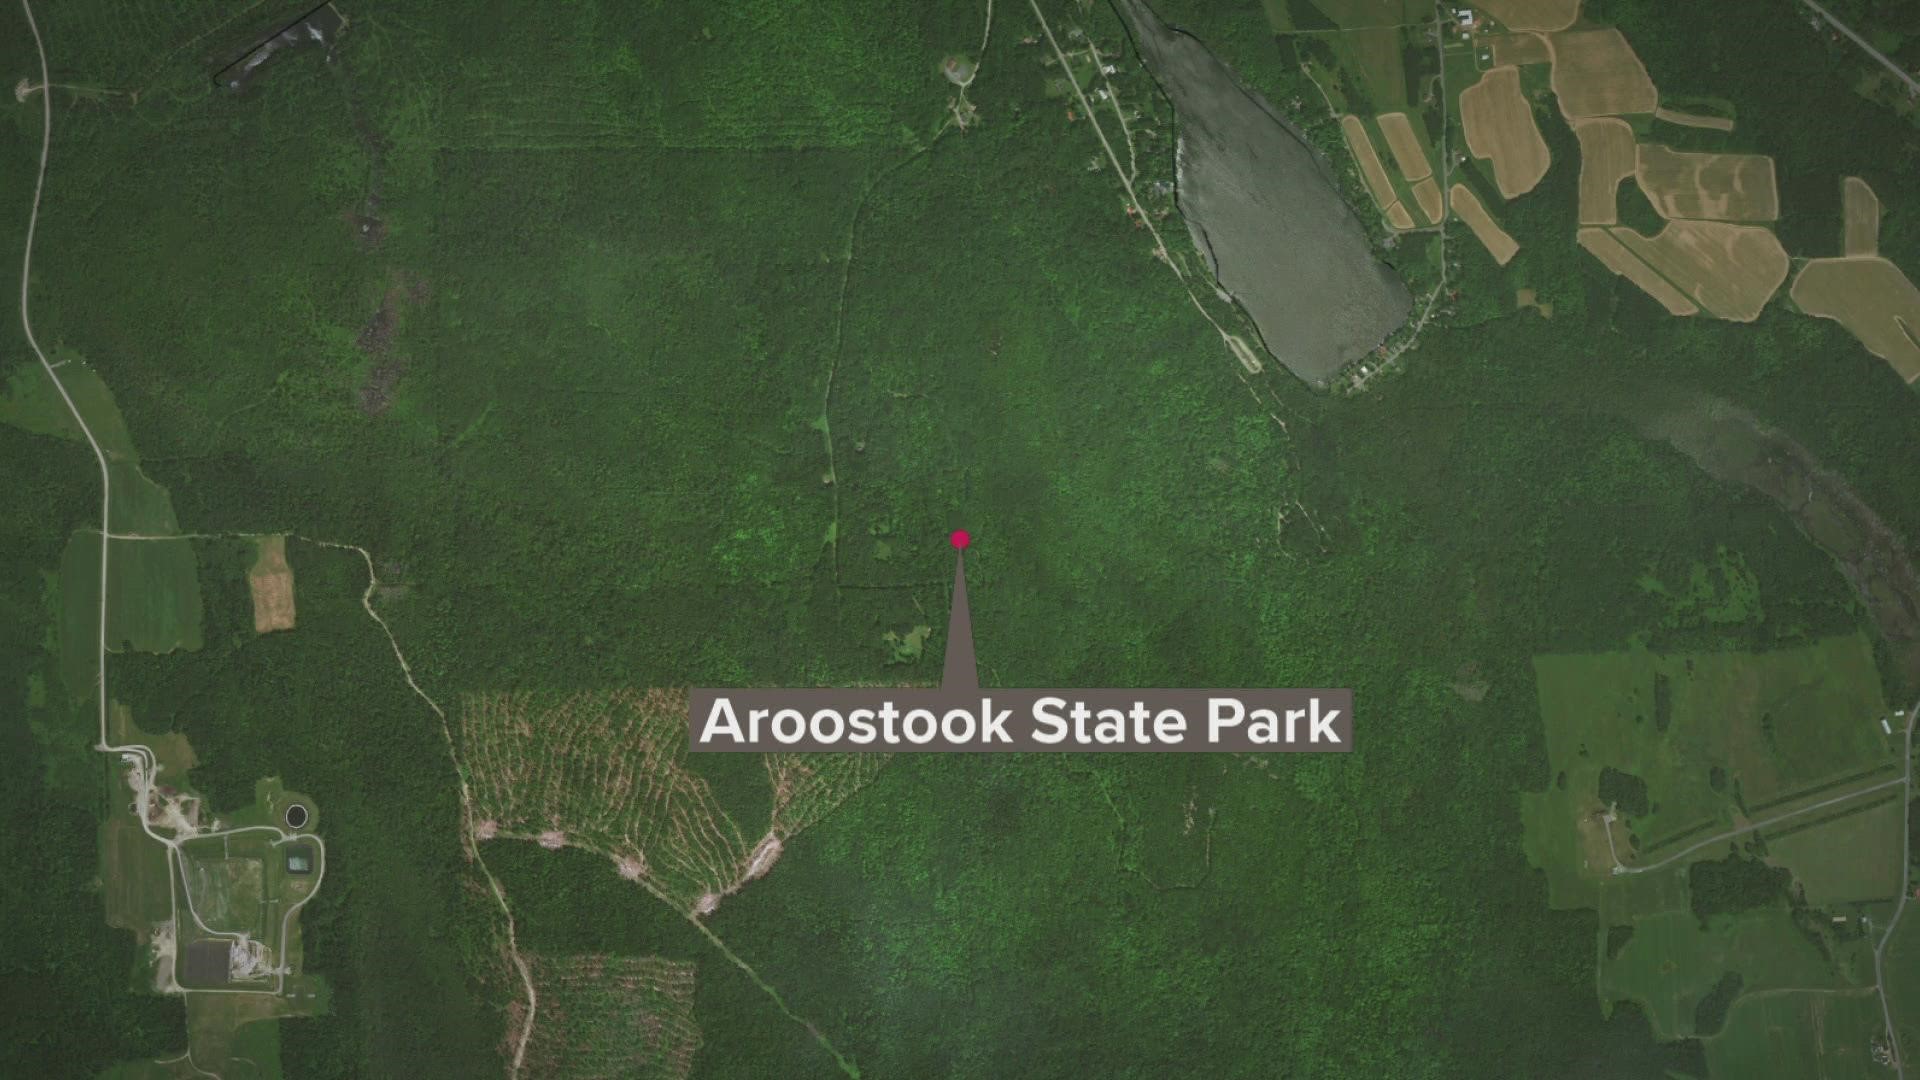 The hiker was on the trail to the south peak in Aroostook State Park when she slipped on a snowy area and slid forty feet down a verticle drop.